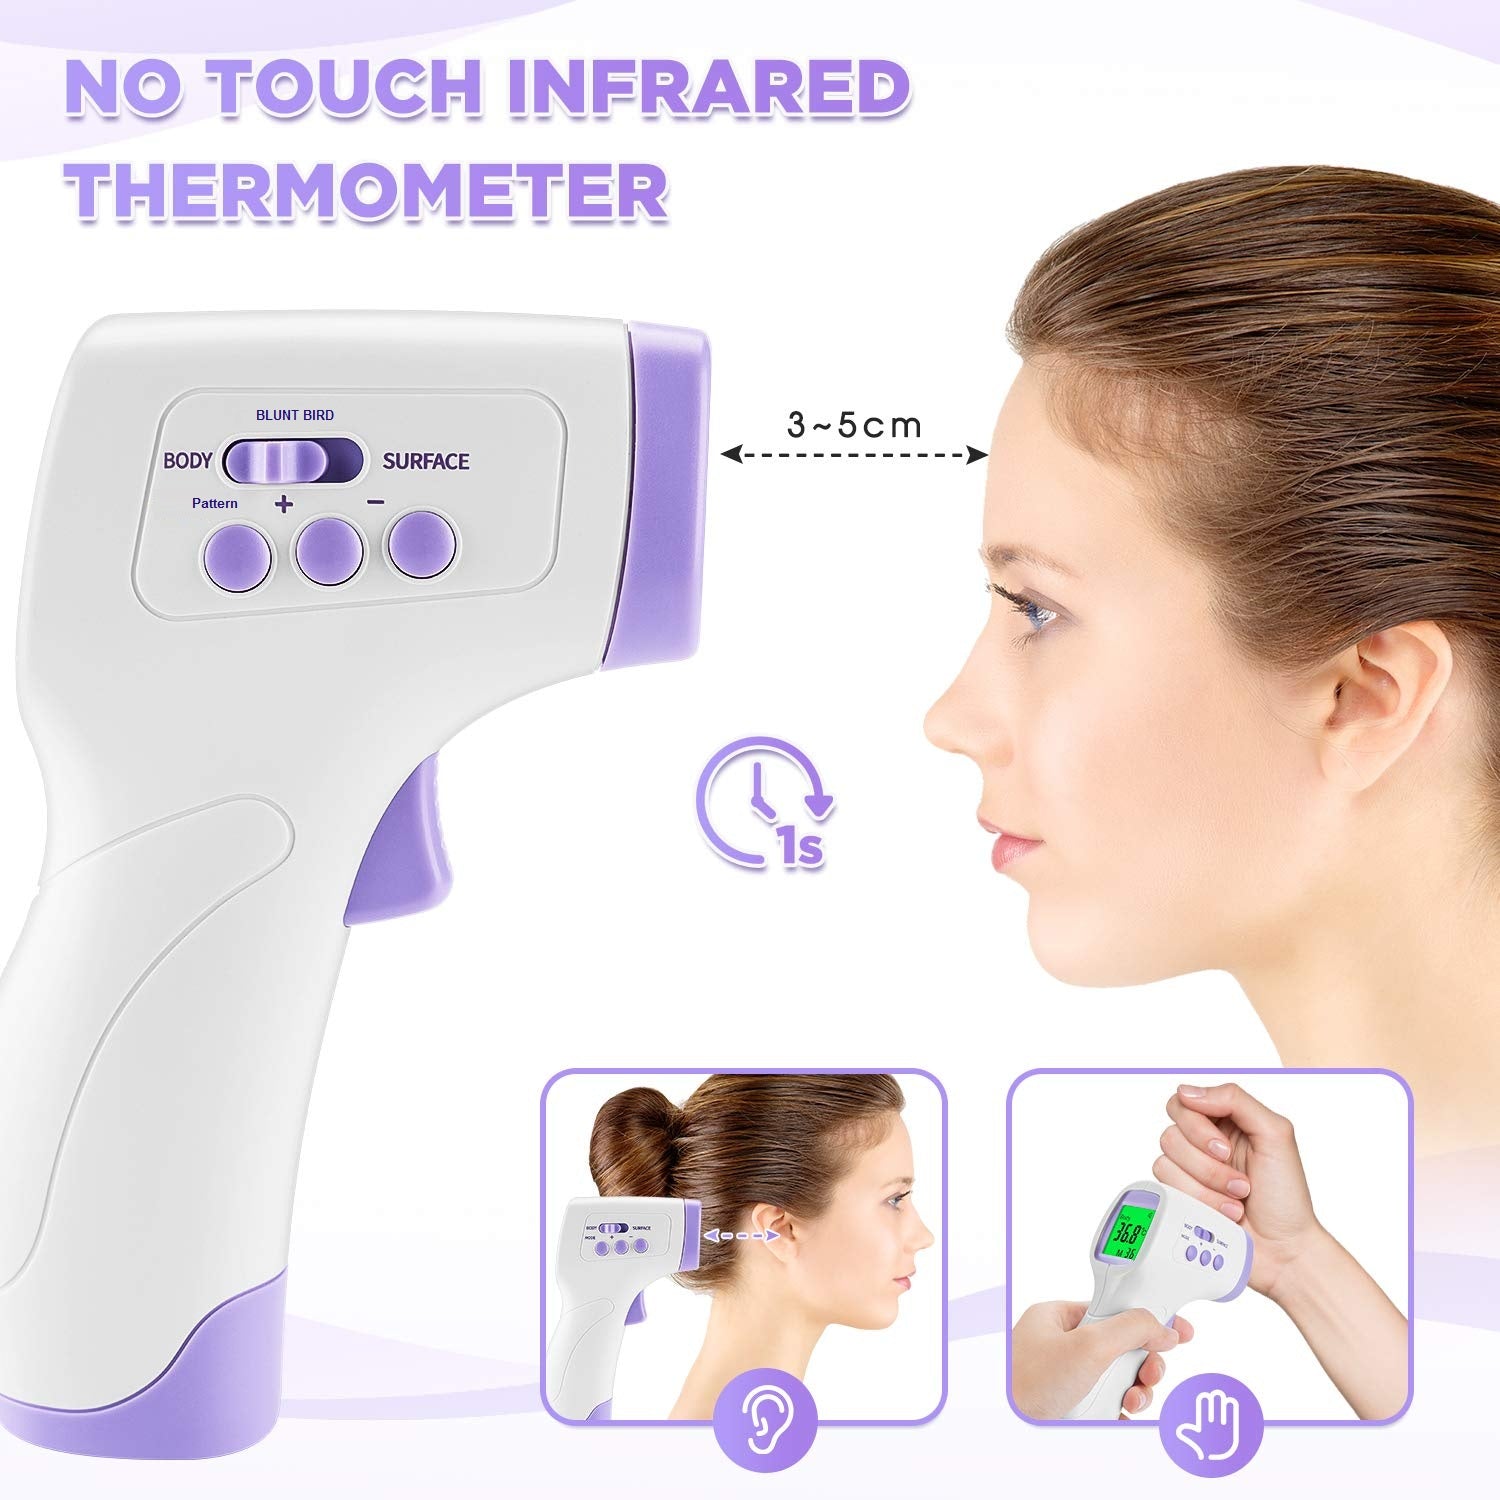 NUCARTURE® blunt bird thermometer DN-998 forehead digital infrared thermometer for fever